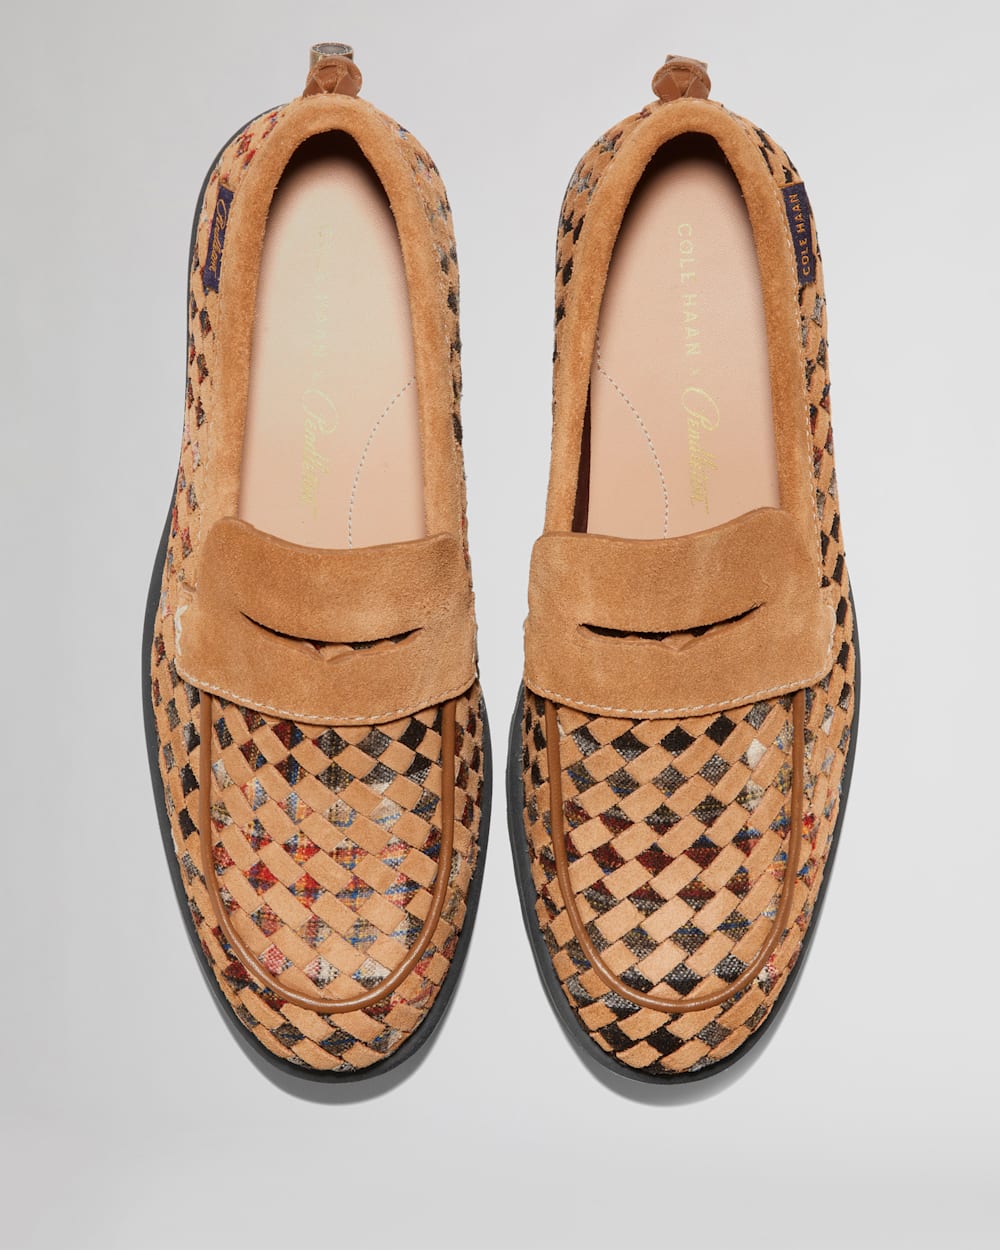 ALTERNATE VIEW OF COLE HAAN X PENDLETON WOMEN'S GENEVA PENNY LOAFERS IN ACADIA PLAID image number 4